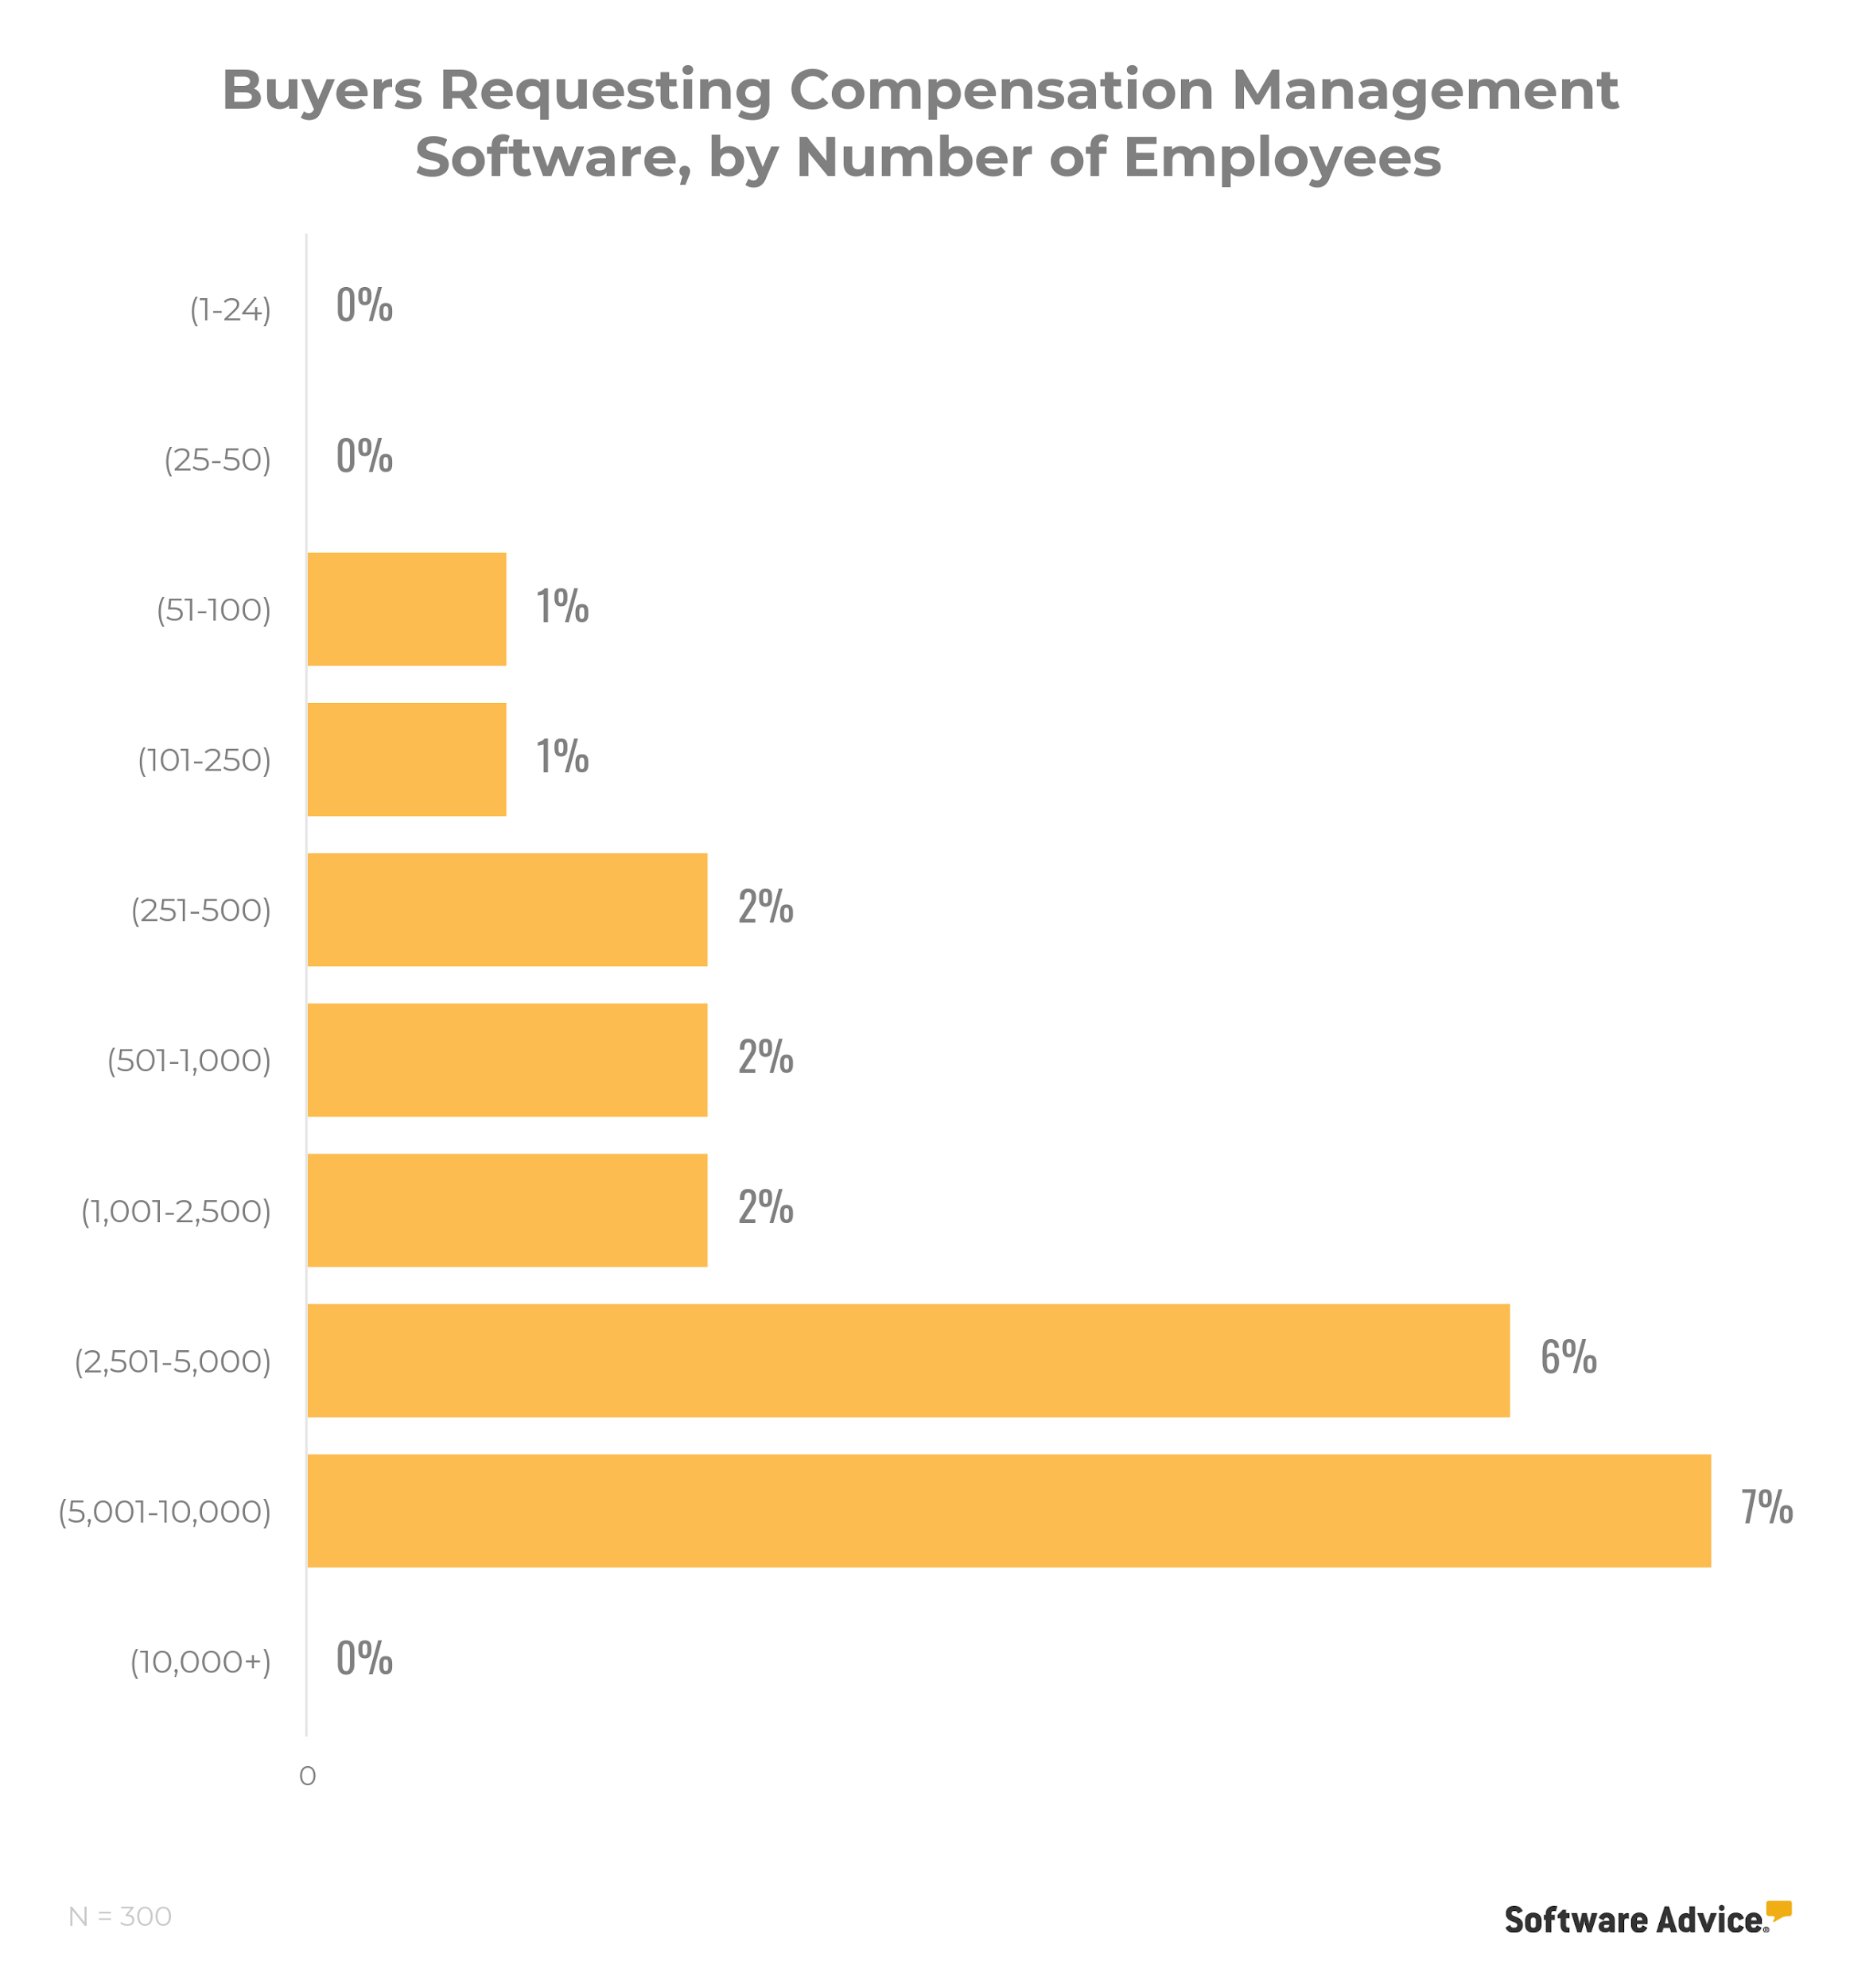 chart-showing-that-compensation-management-is-of-interest-to-businesses-with-more-than-5,000-employees